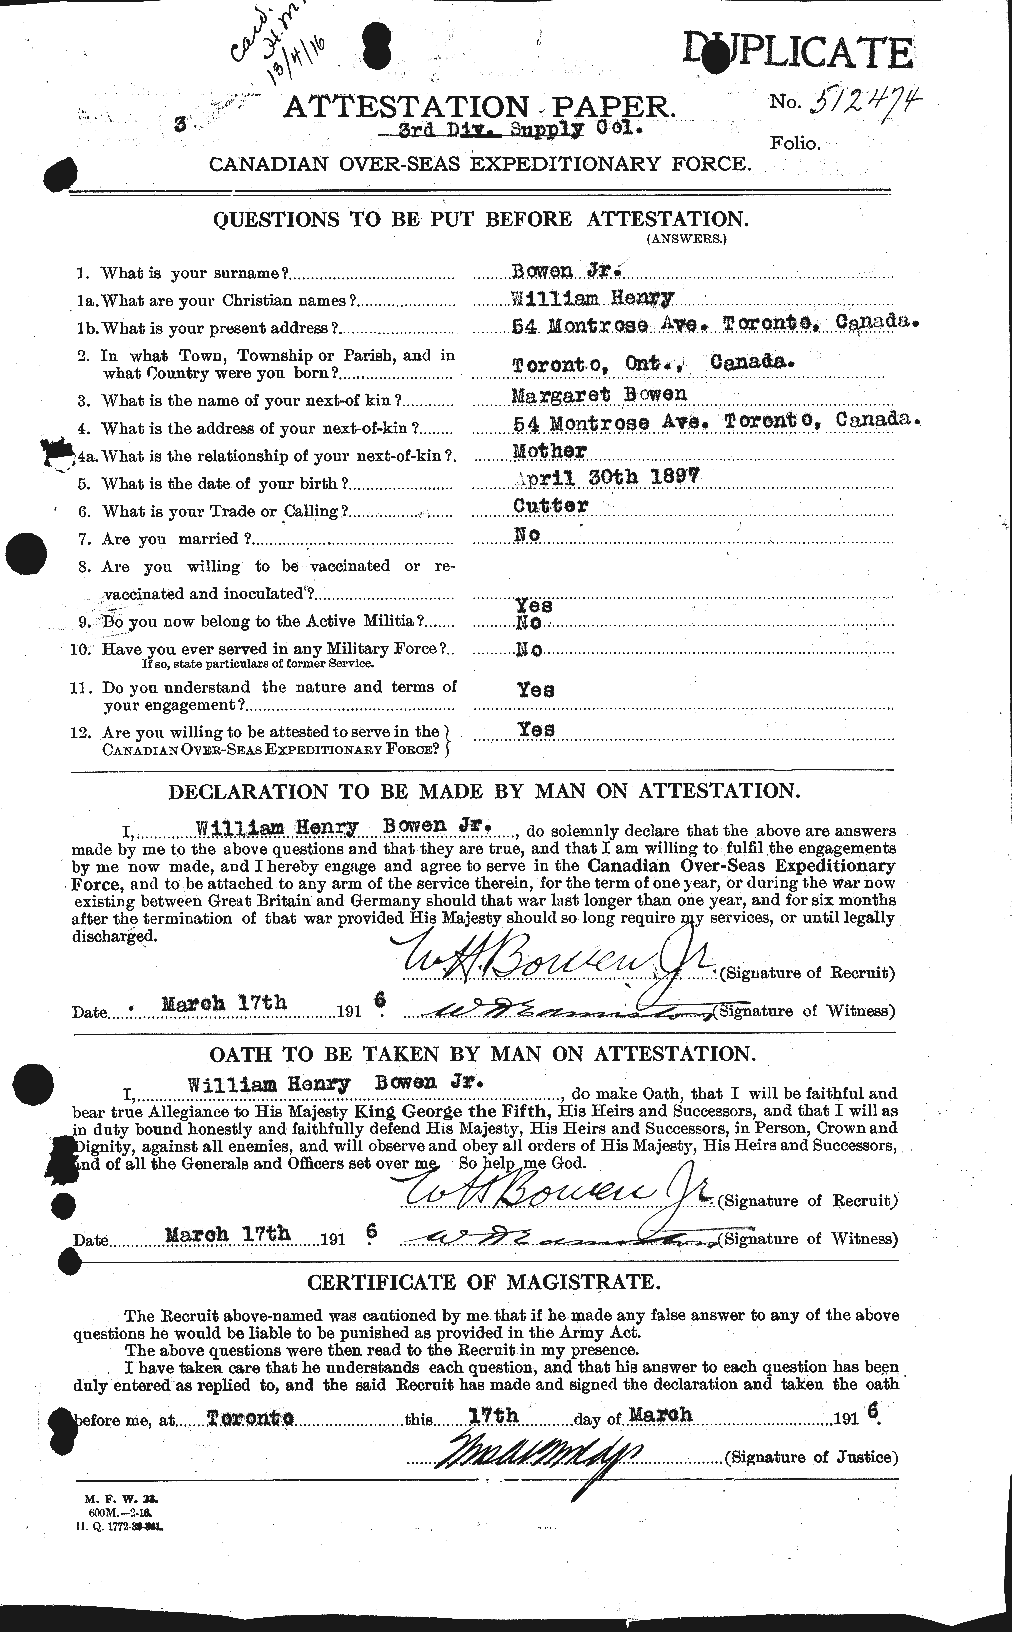 Personnel Records of the First World War - CEF 255488a